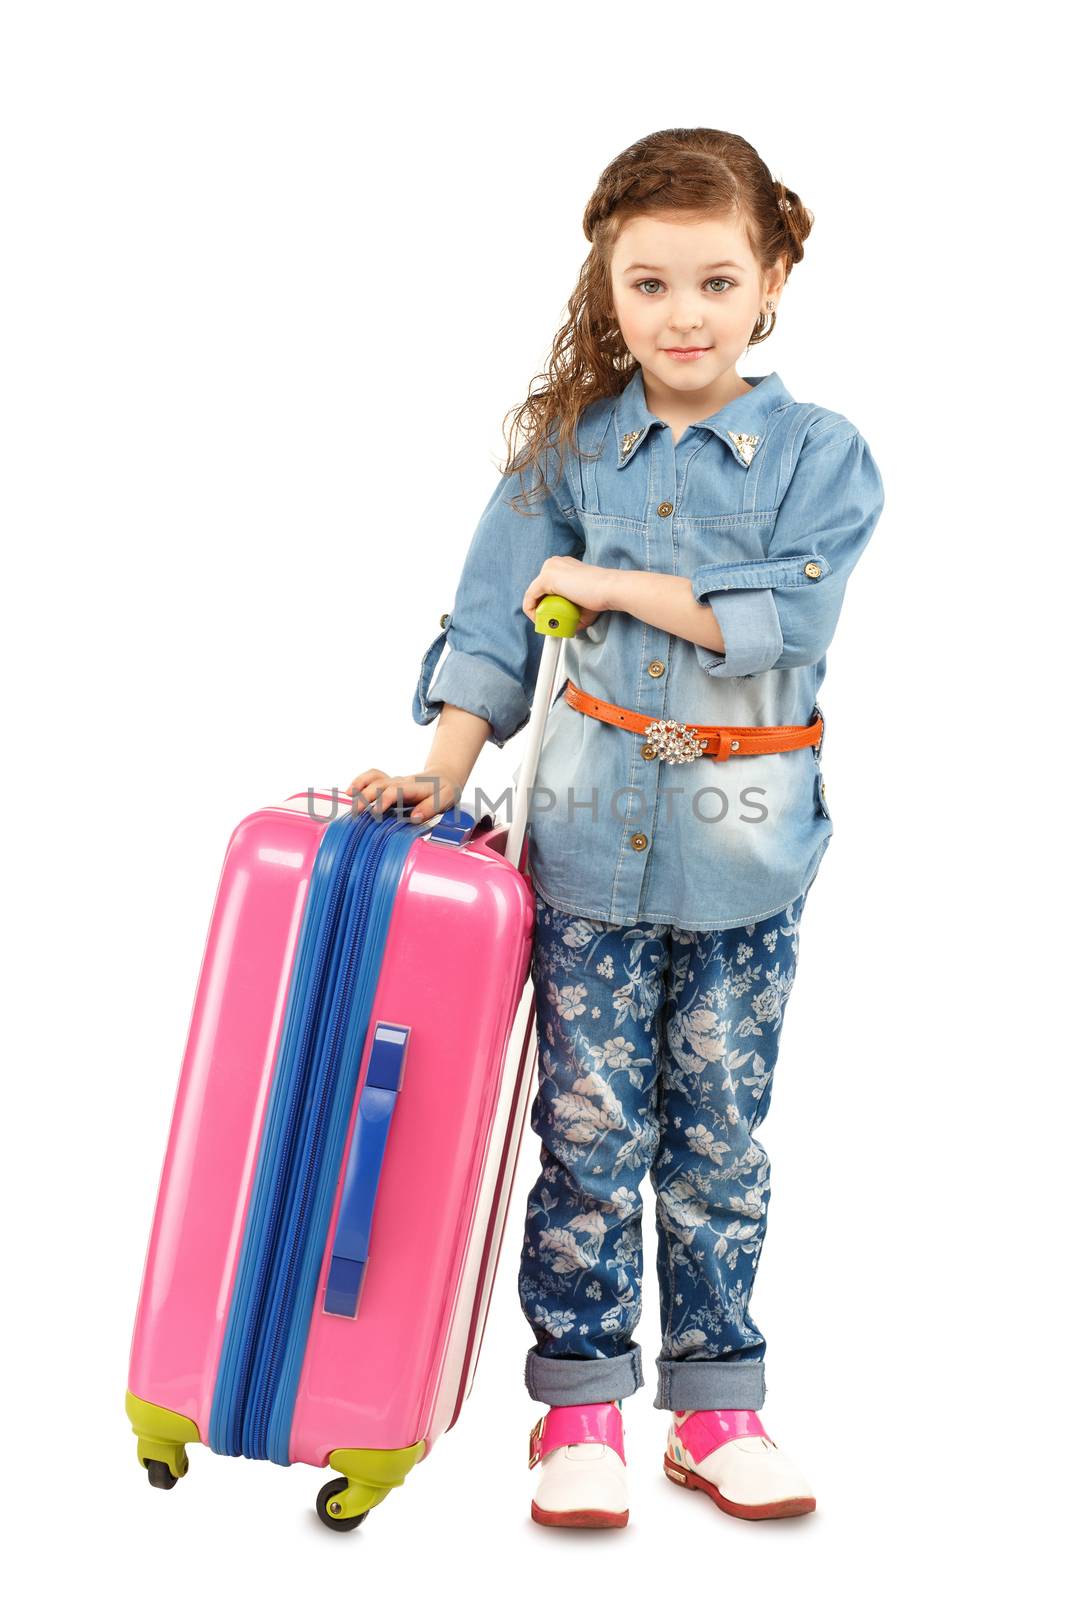 Full-length portrait of a pretty little girl with big pink suitcase on wheels isolated on white background. Concept holidays and vacations.